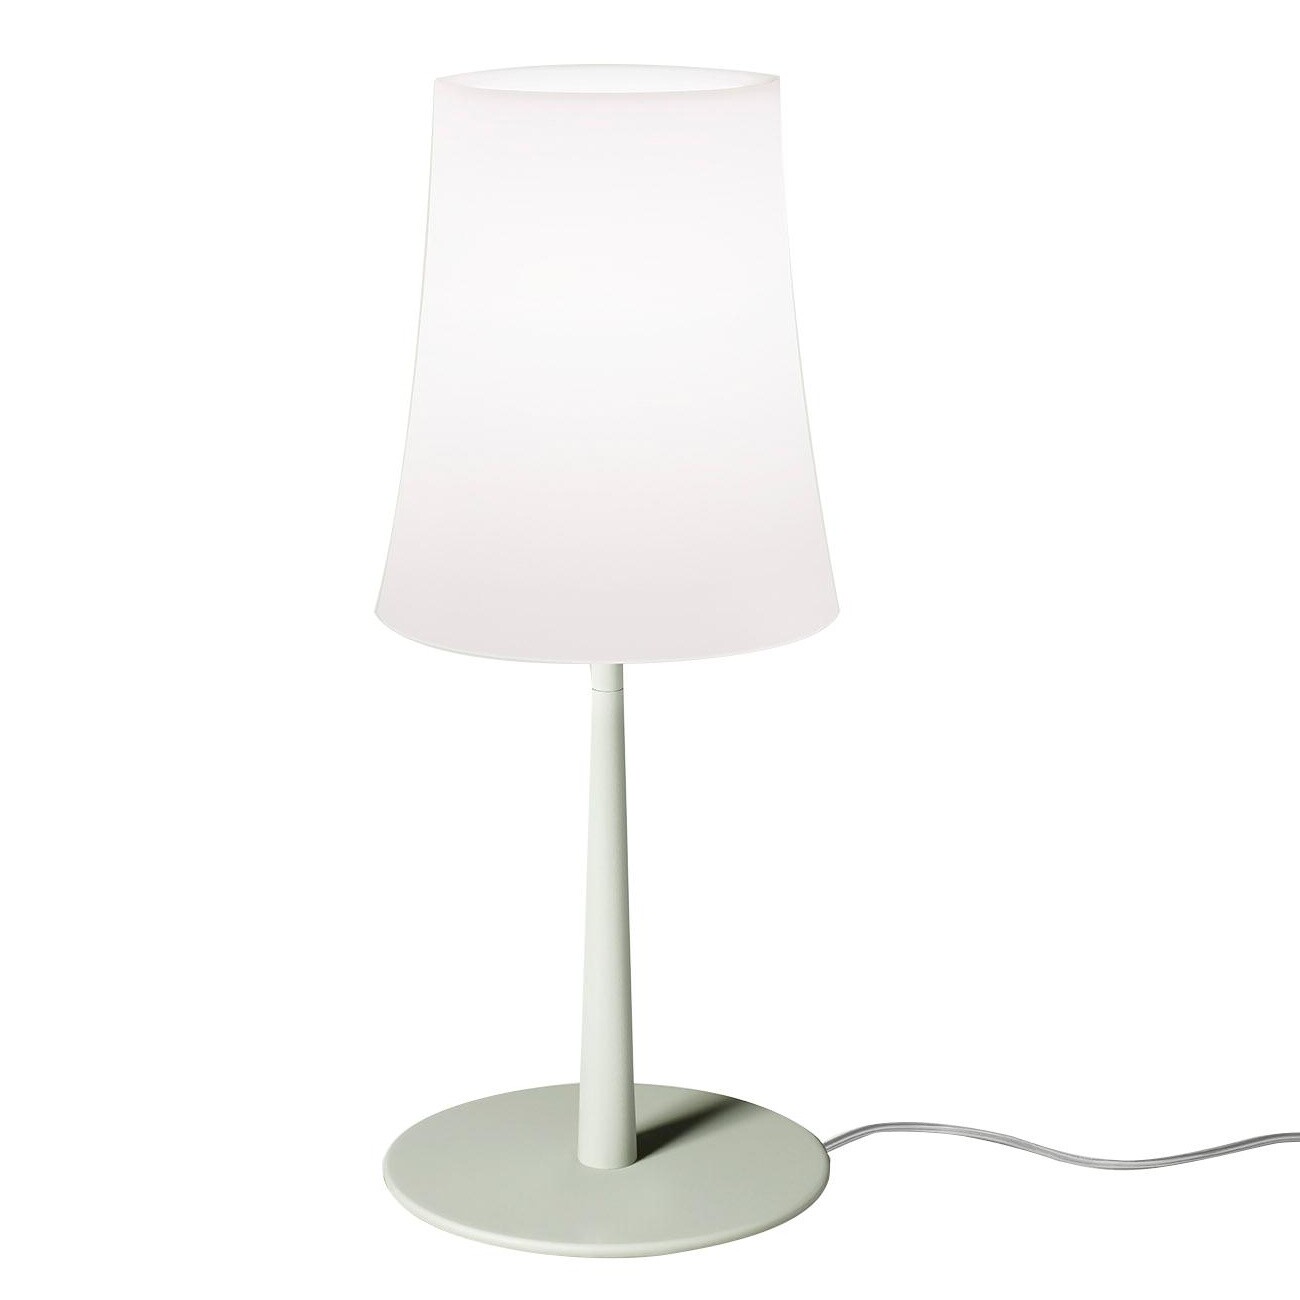 Foscarini Birdie Easy Table Lamp, How To Make A Cordless Table Lamp